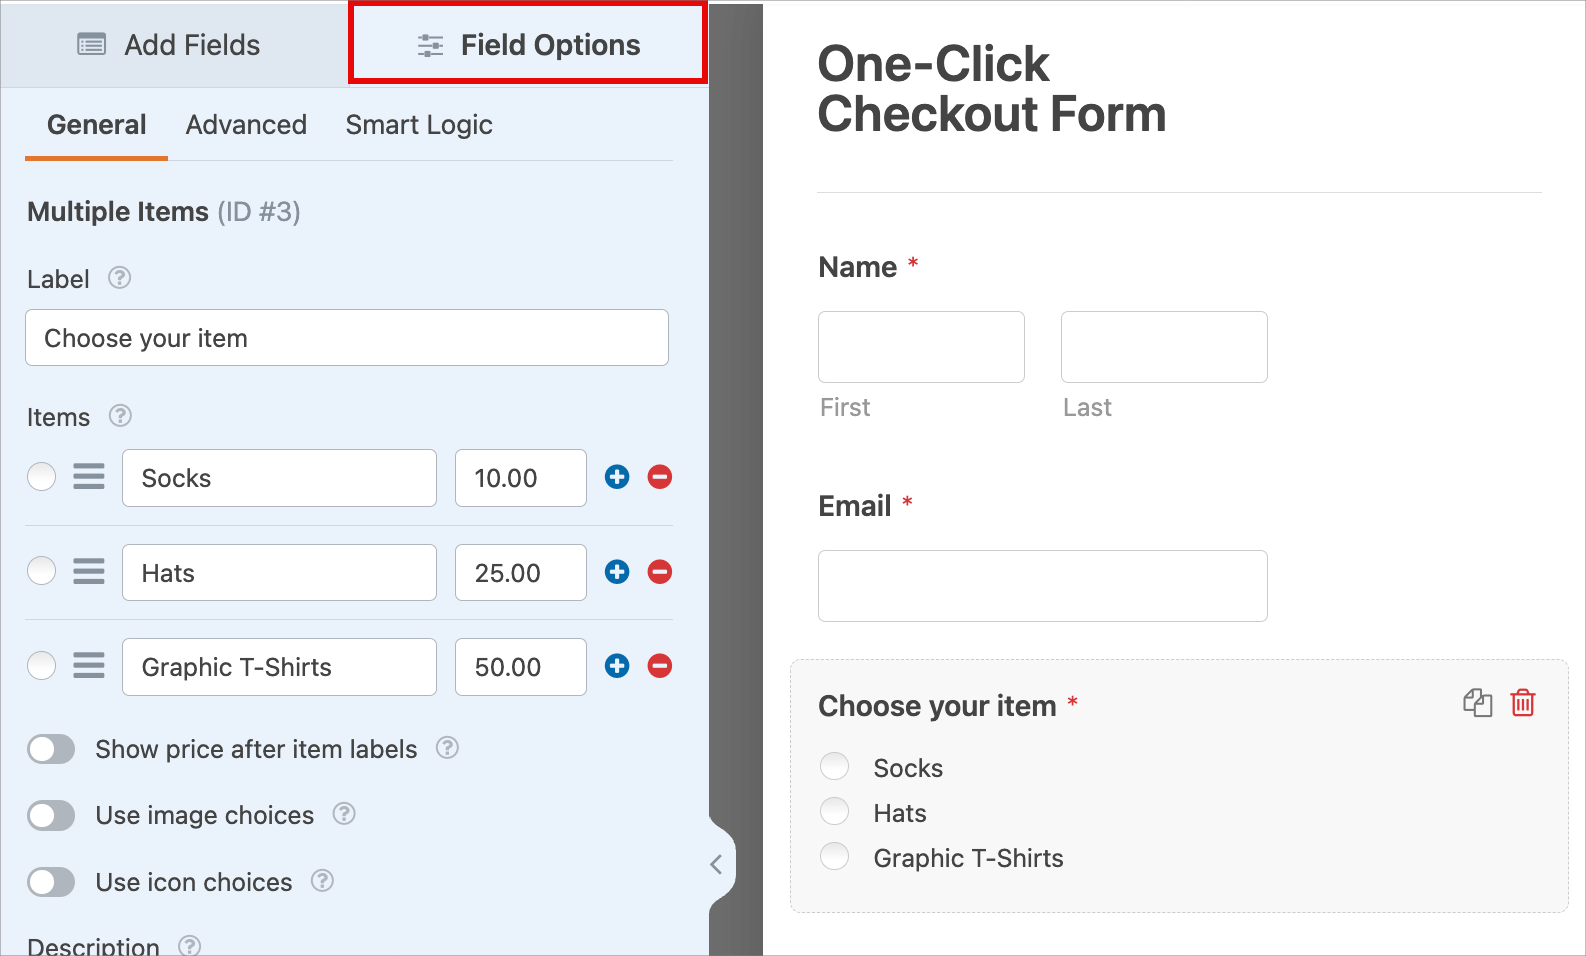 one-click checkout form field options